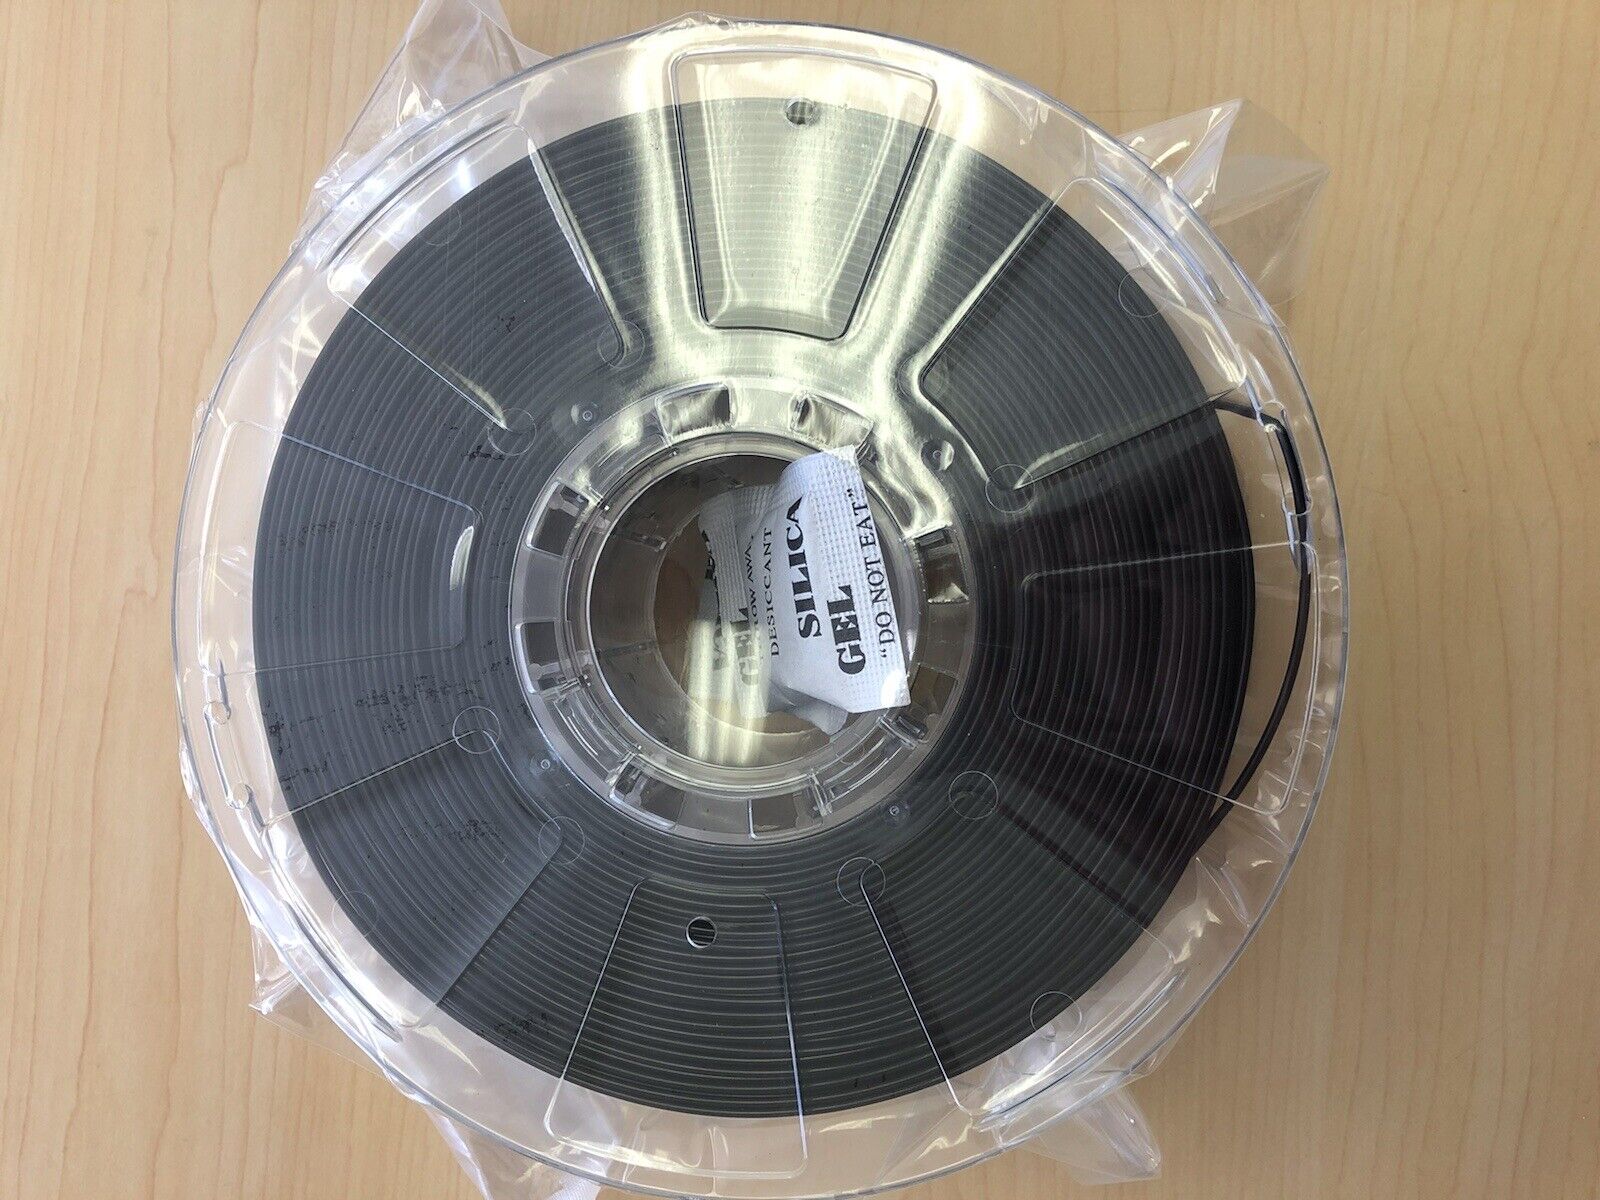 FAST Shipping  3 rolls of 500g PLA Black, Silver And Gold filament